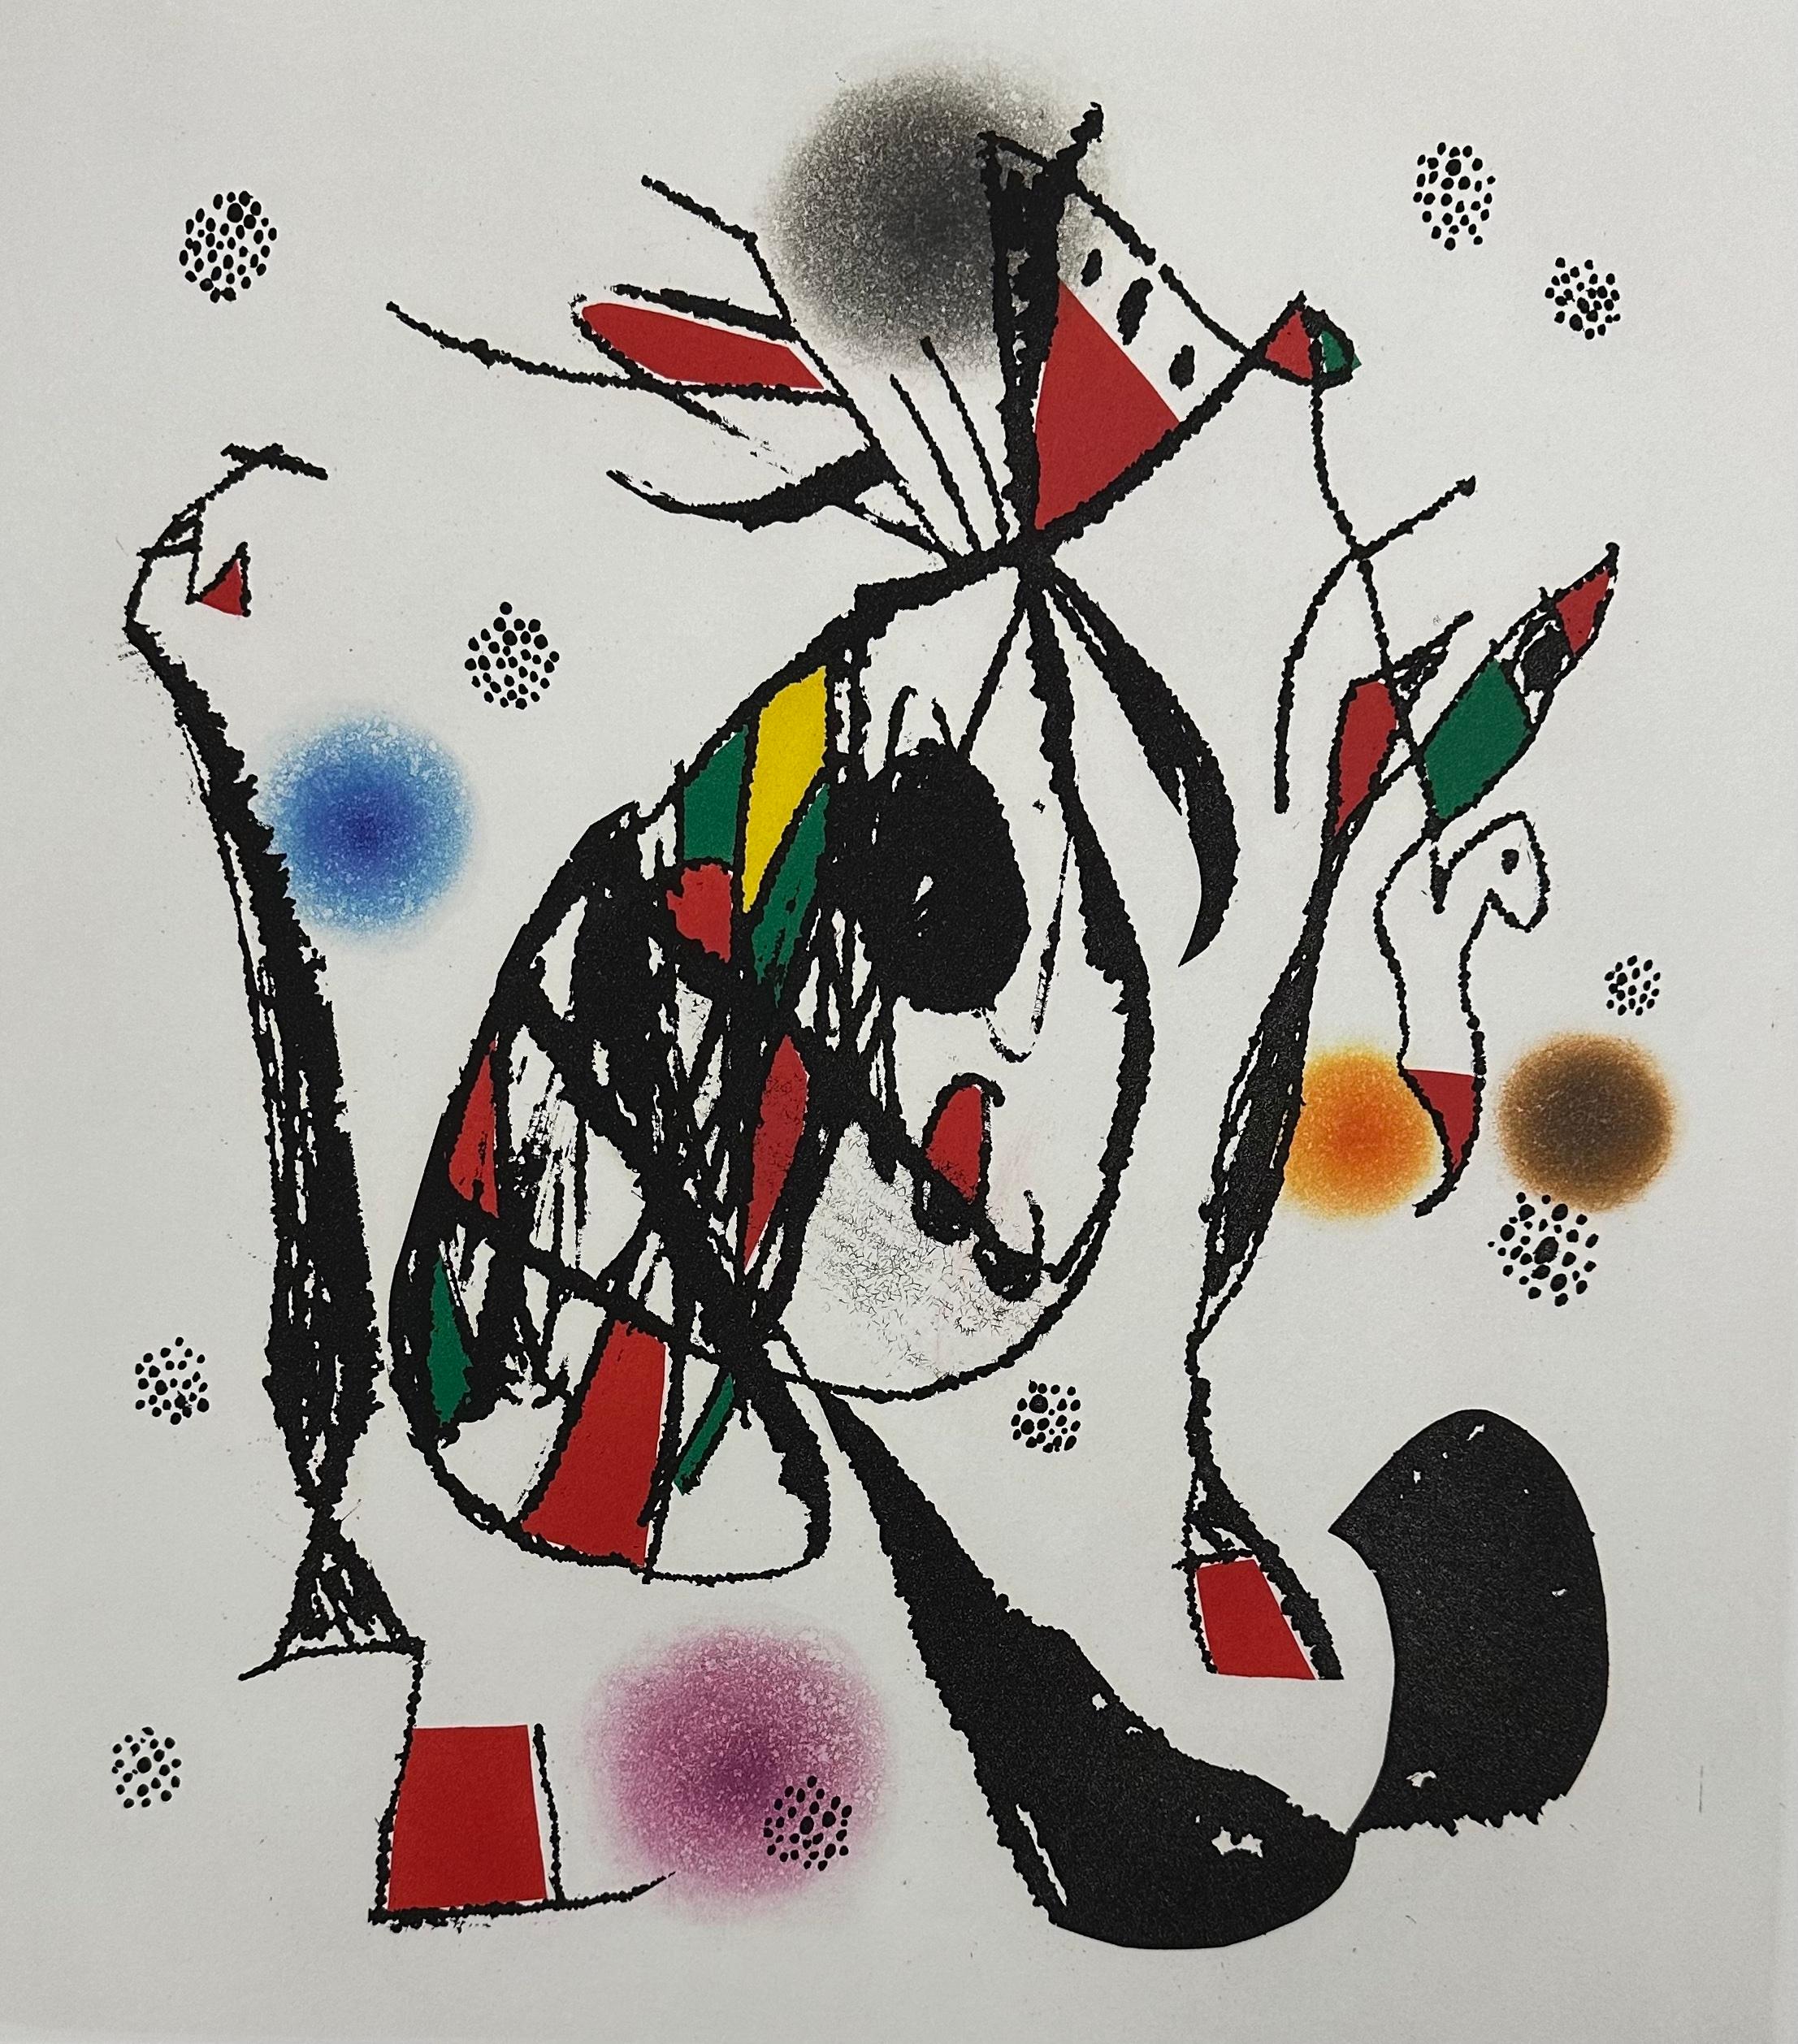 Joan Miro
Escalade de la butte
1976
Original etching and aquatint in colors on BFK Rives paper
Hand signed in pencil and numbered 35/50 from the edition of 50
Published by Atelier Lacouriére et Frélaut, Paris
Reference: D.932
Image size: 19 x 17